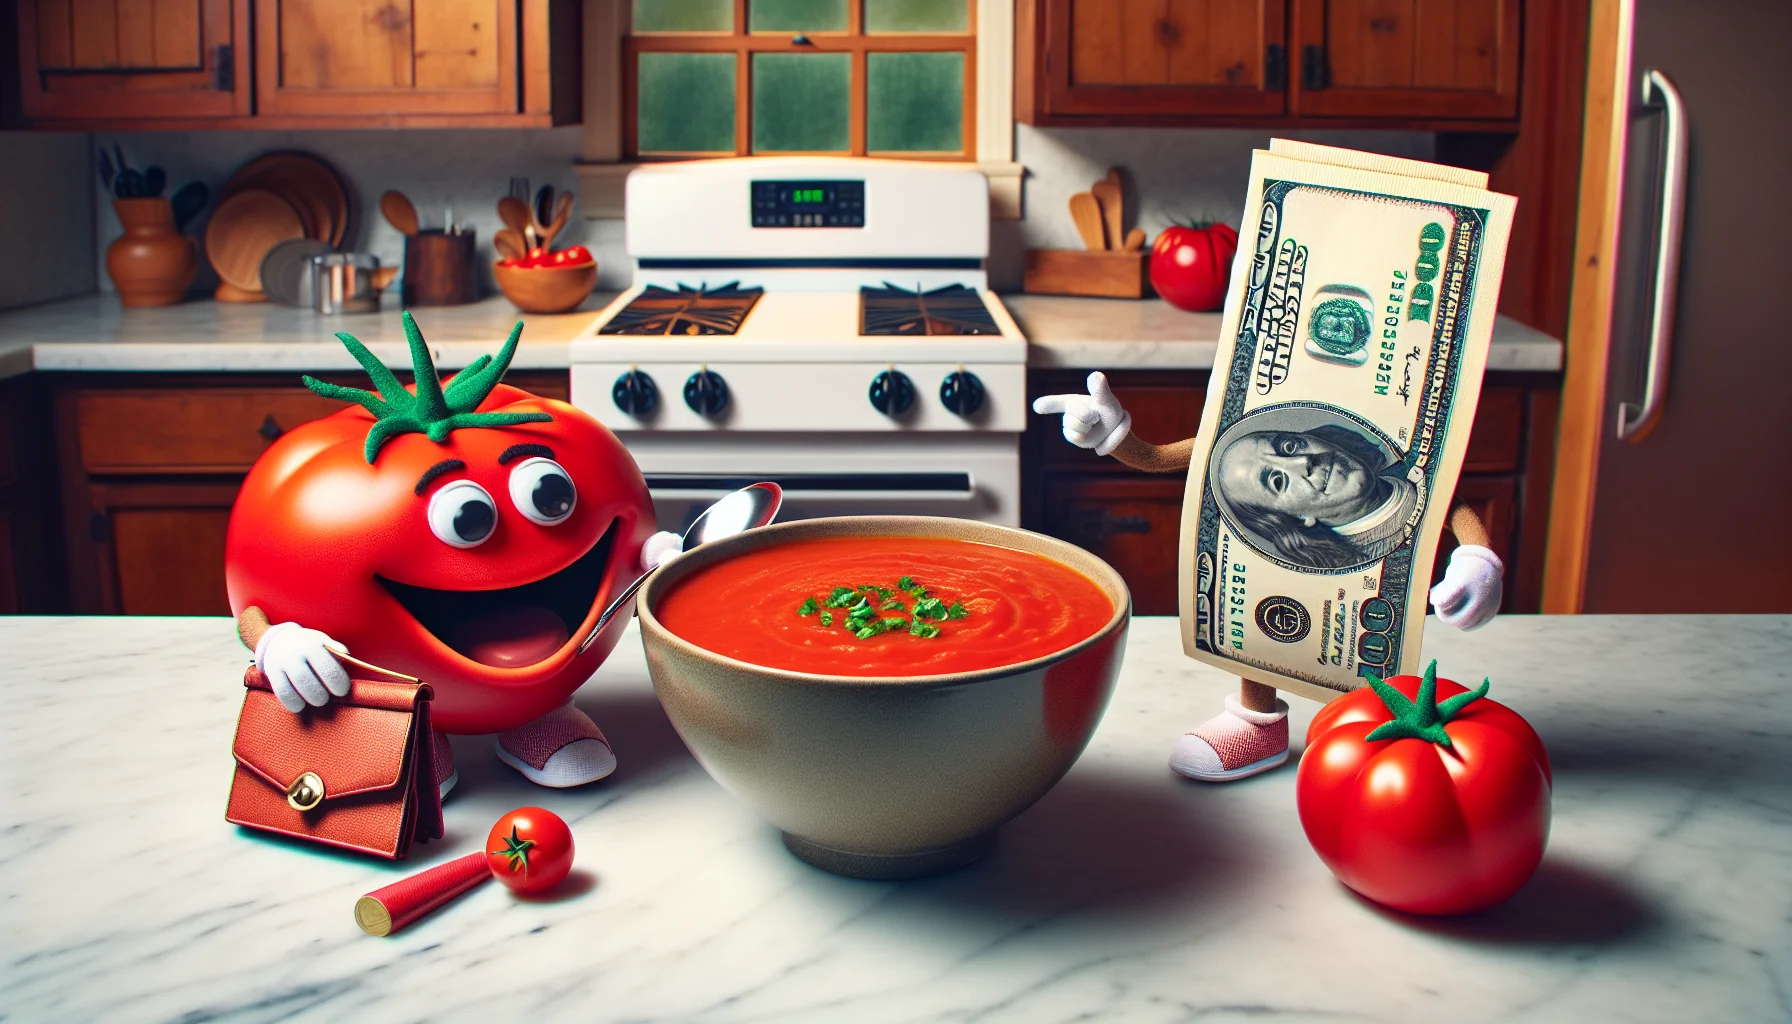 An amusing scene for a realistic image to inspire economic healthy eating: Picture this - a vibrant red bowl of 4bs tomato soup situated in the kitchen of an animated modest house. The amusing part comes from the cleverly designed anthropomorphic pocketbook and money which are laughing and pointing in delight at the soup, clearly in awe of how tasty and economically friendly the meal is. The kitchen is decorated in a rustic style with wooden cupboards and a marble countertop, while a glossy red tomato sits on the counter as a hint to the soup's chief ingredient.